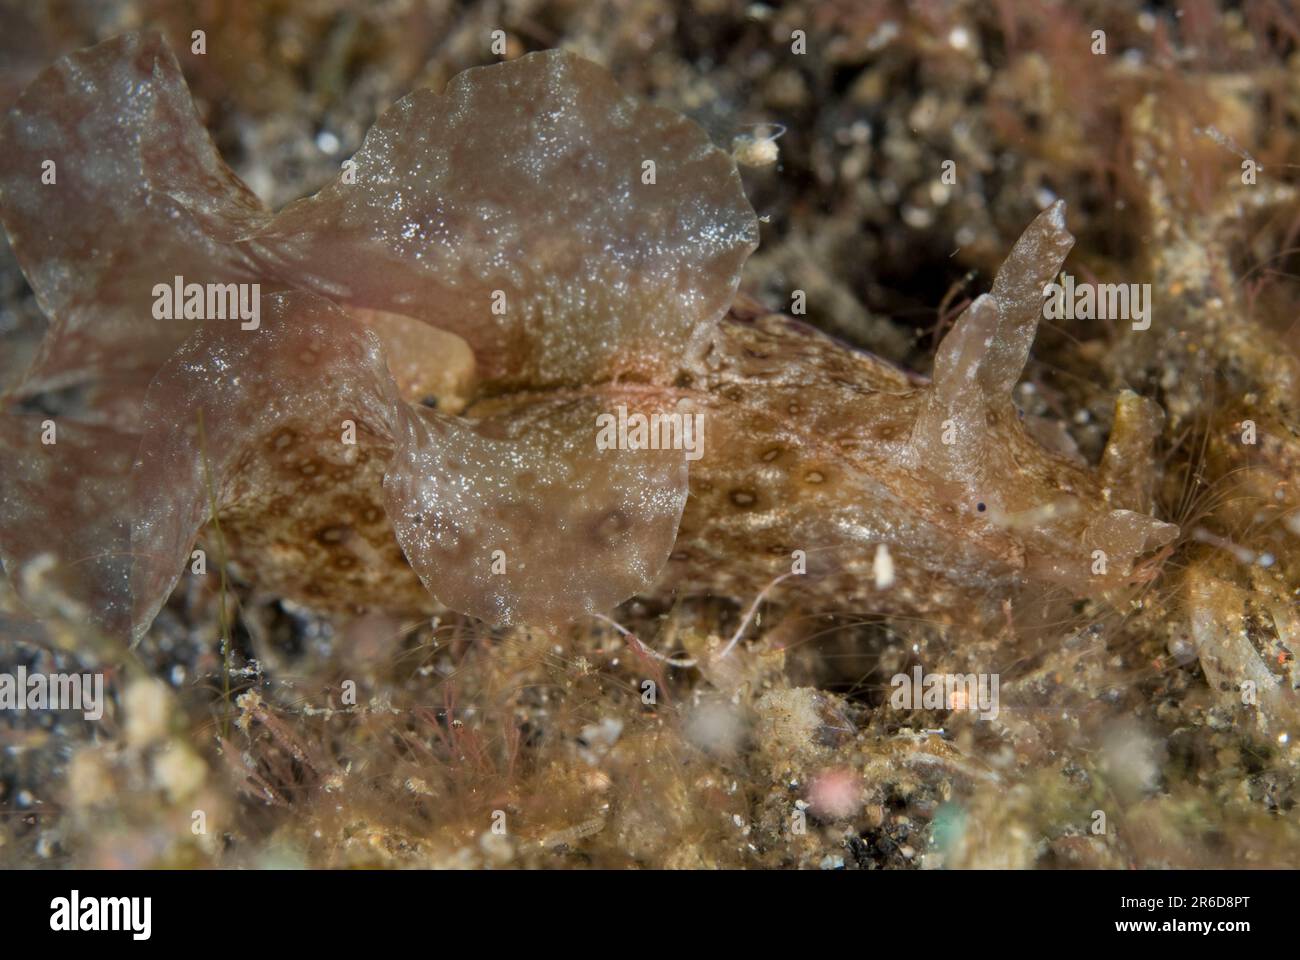 Spotted Sea Hare, Aplysia argus, Aer Perang sito di immersione, Lembeh Straits, Sulawesi, Indonesia Foto Stock